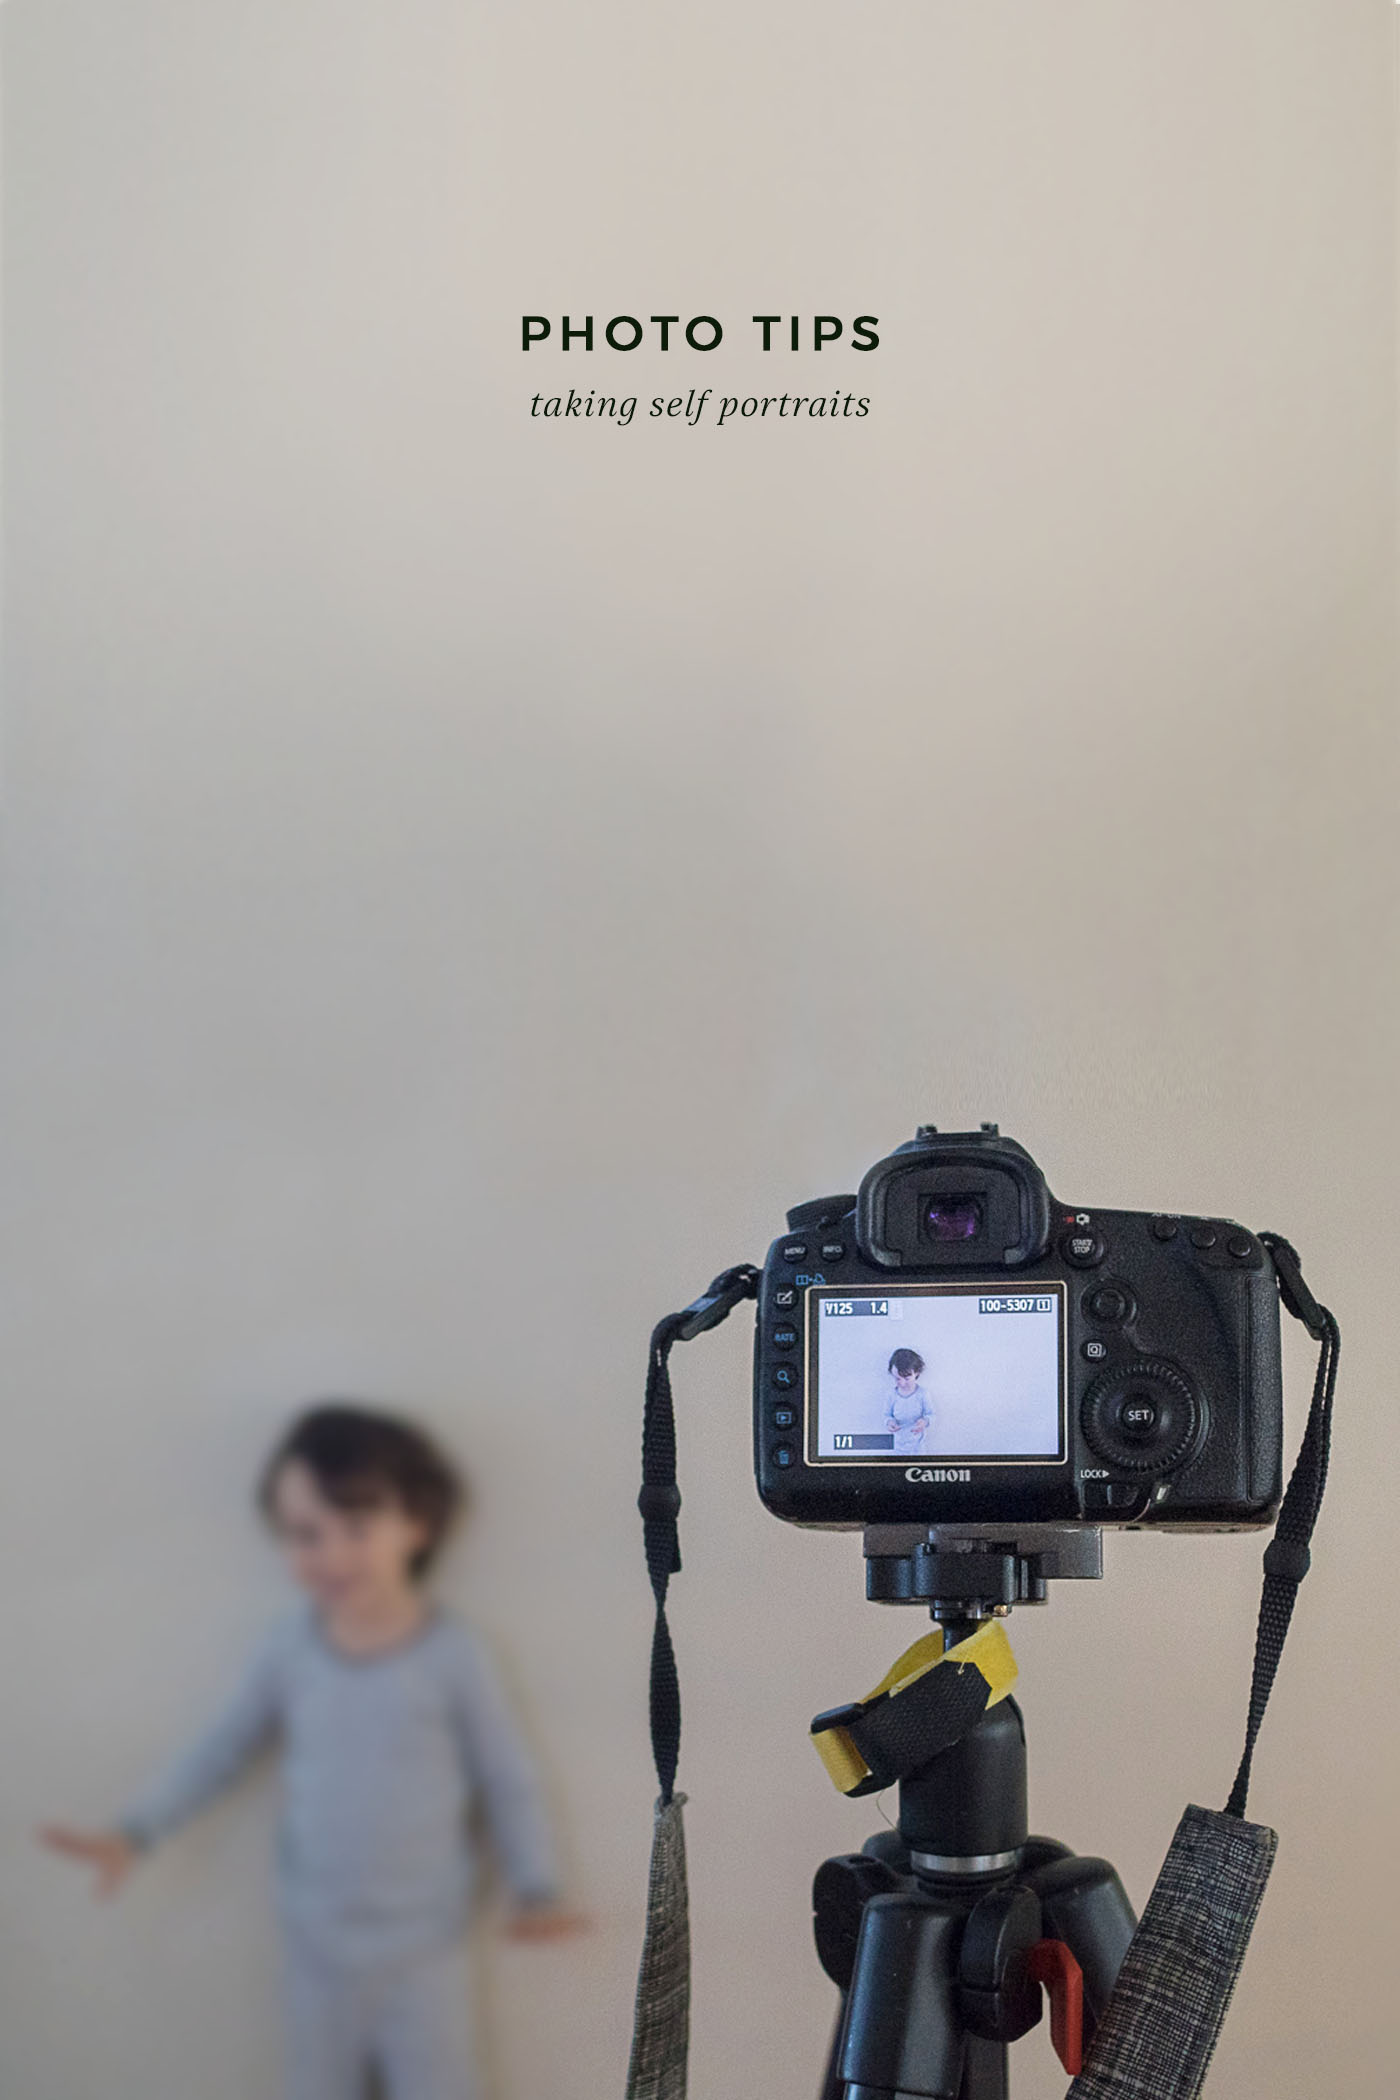 Photo Tips Series - How to take self-portraits (not selfies!). Perfect for DIY holiday photos!